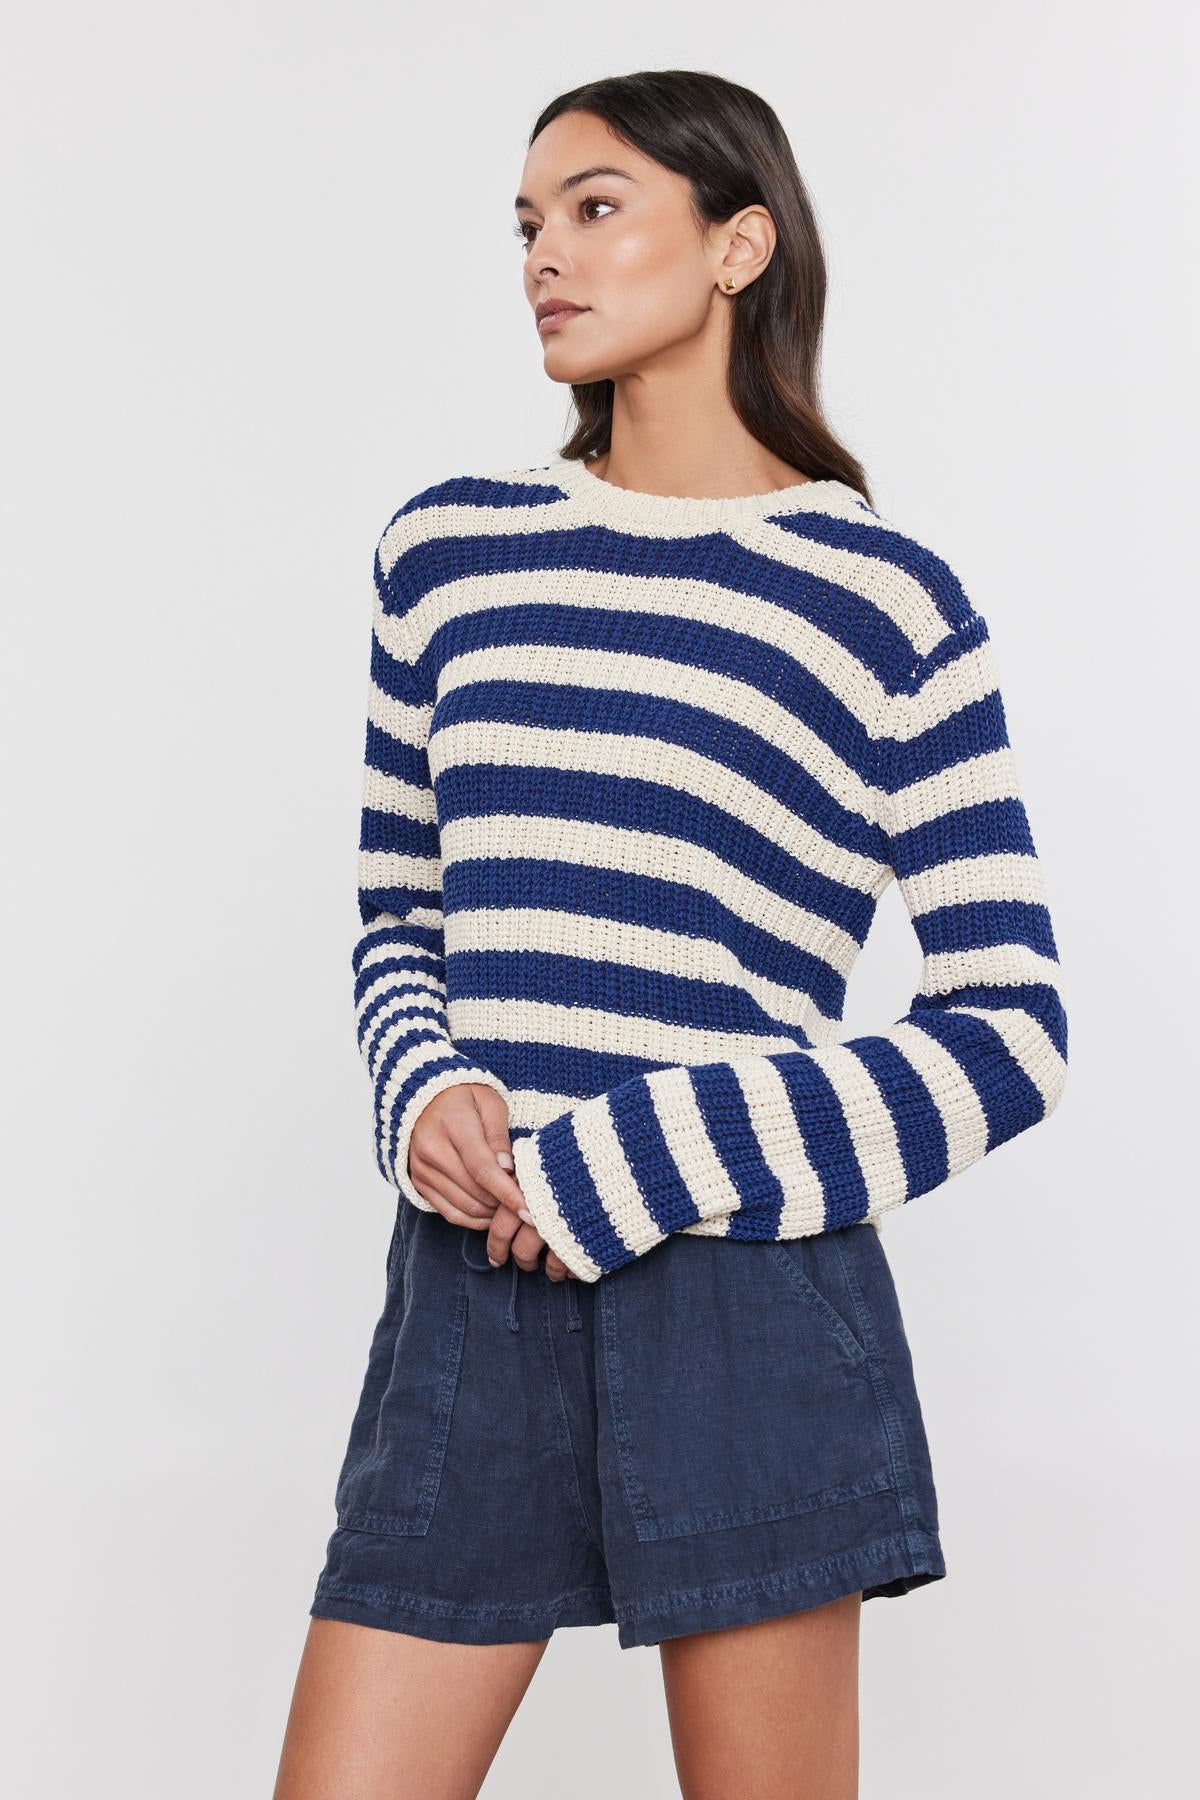 A woman in a Velvet by Graham & Spencer MAXINE SWEATER and denim skirt poses with her hand on her hip, looking to the side on a white background.-36830358077633